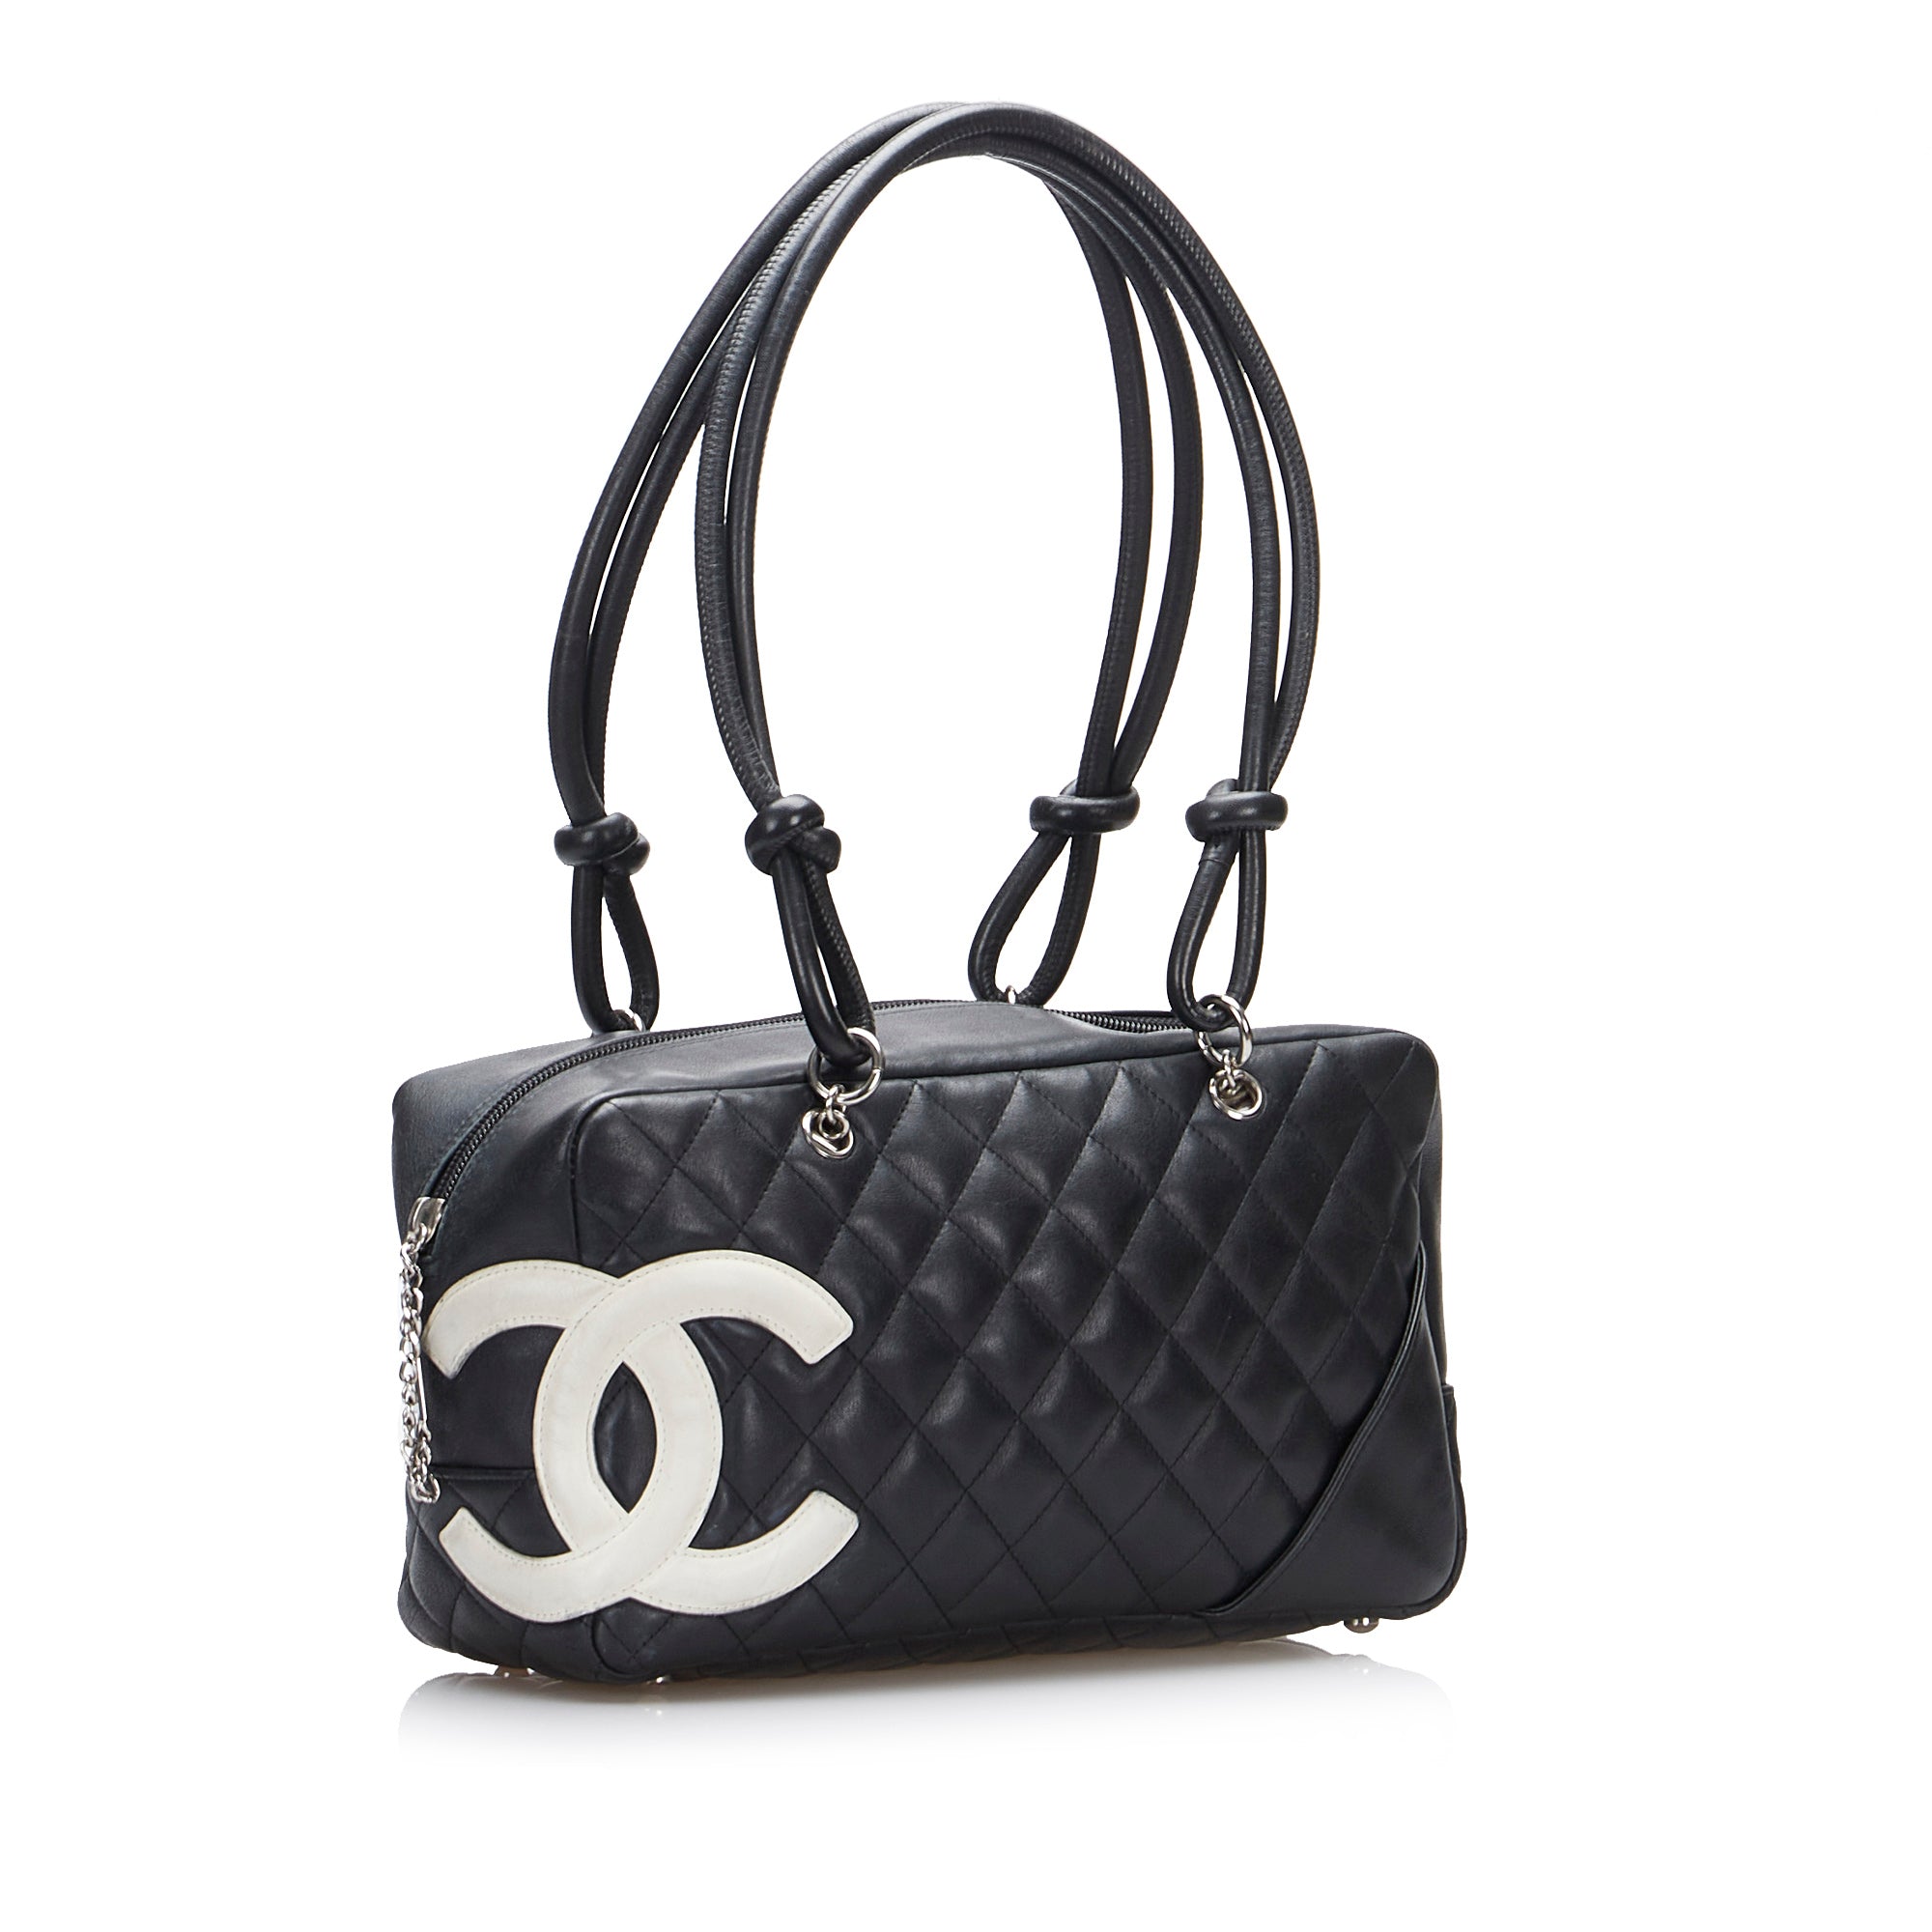 17 Most Iconic Chanel Bags Worth the Investment  Glowsly